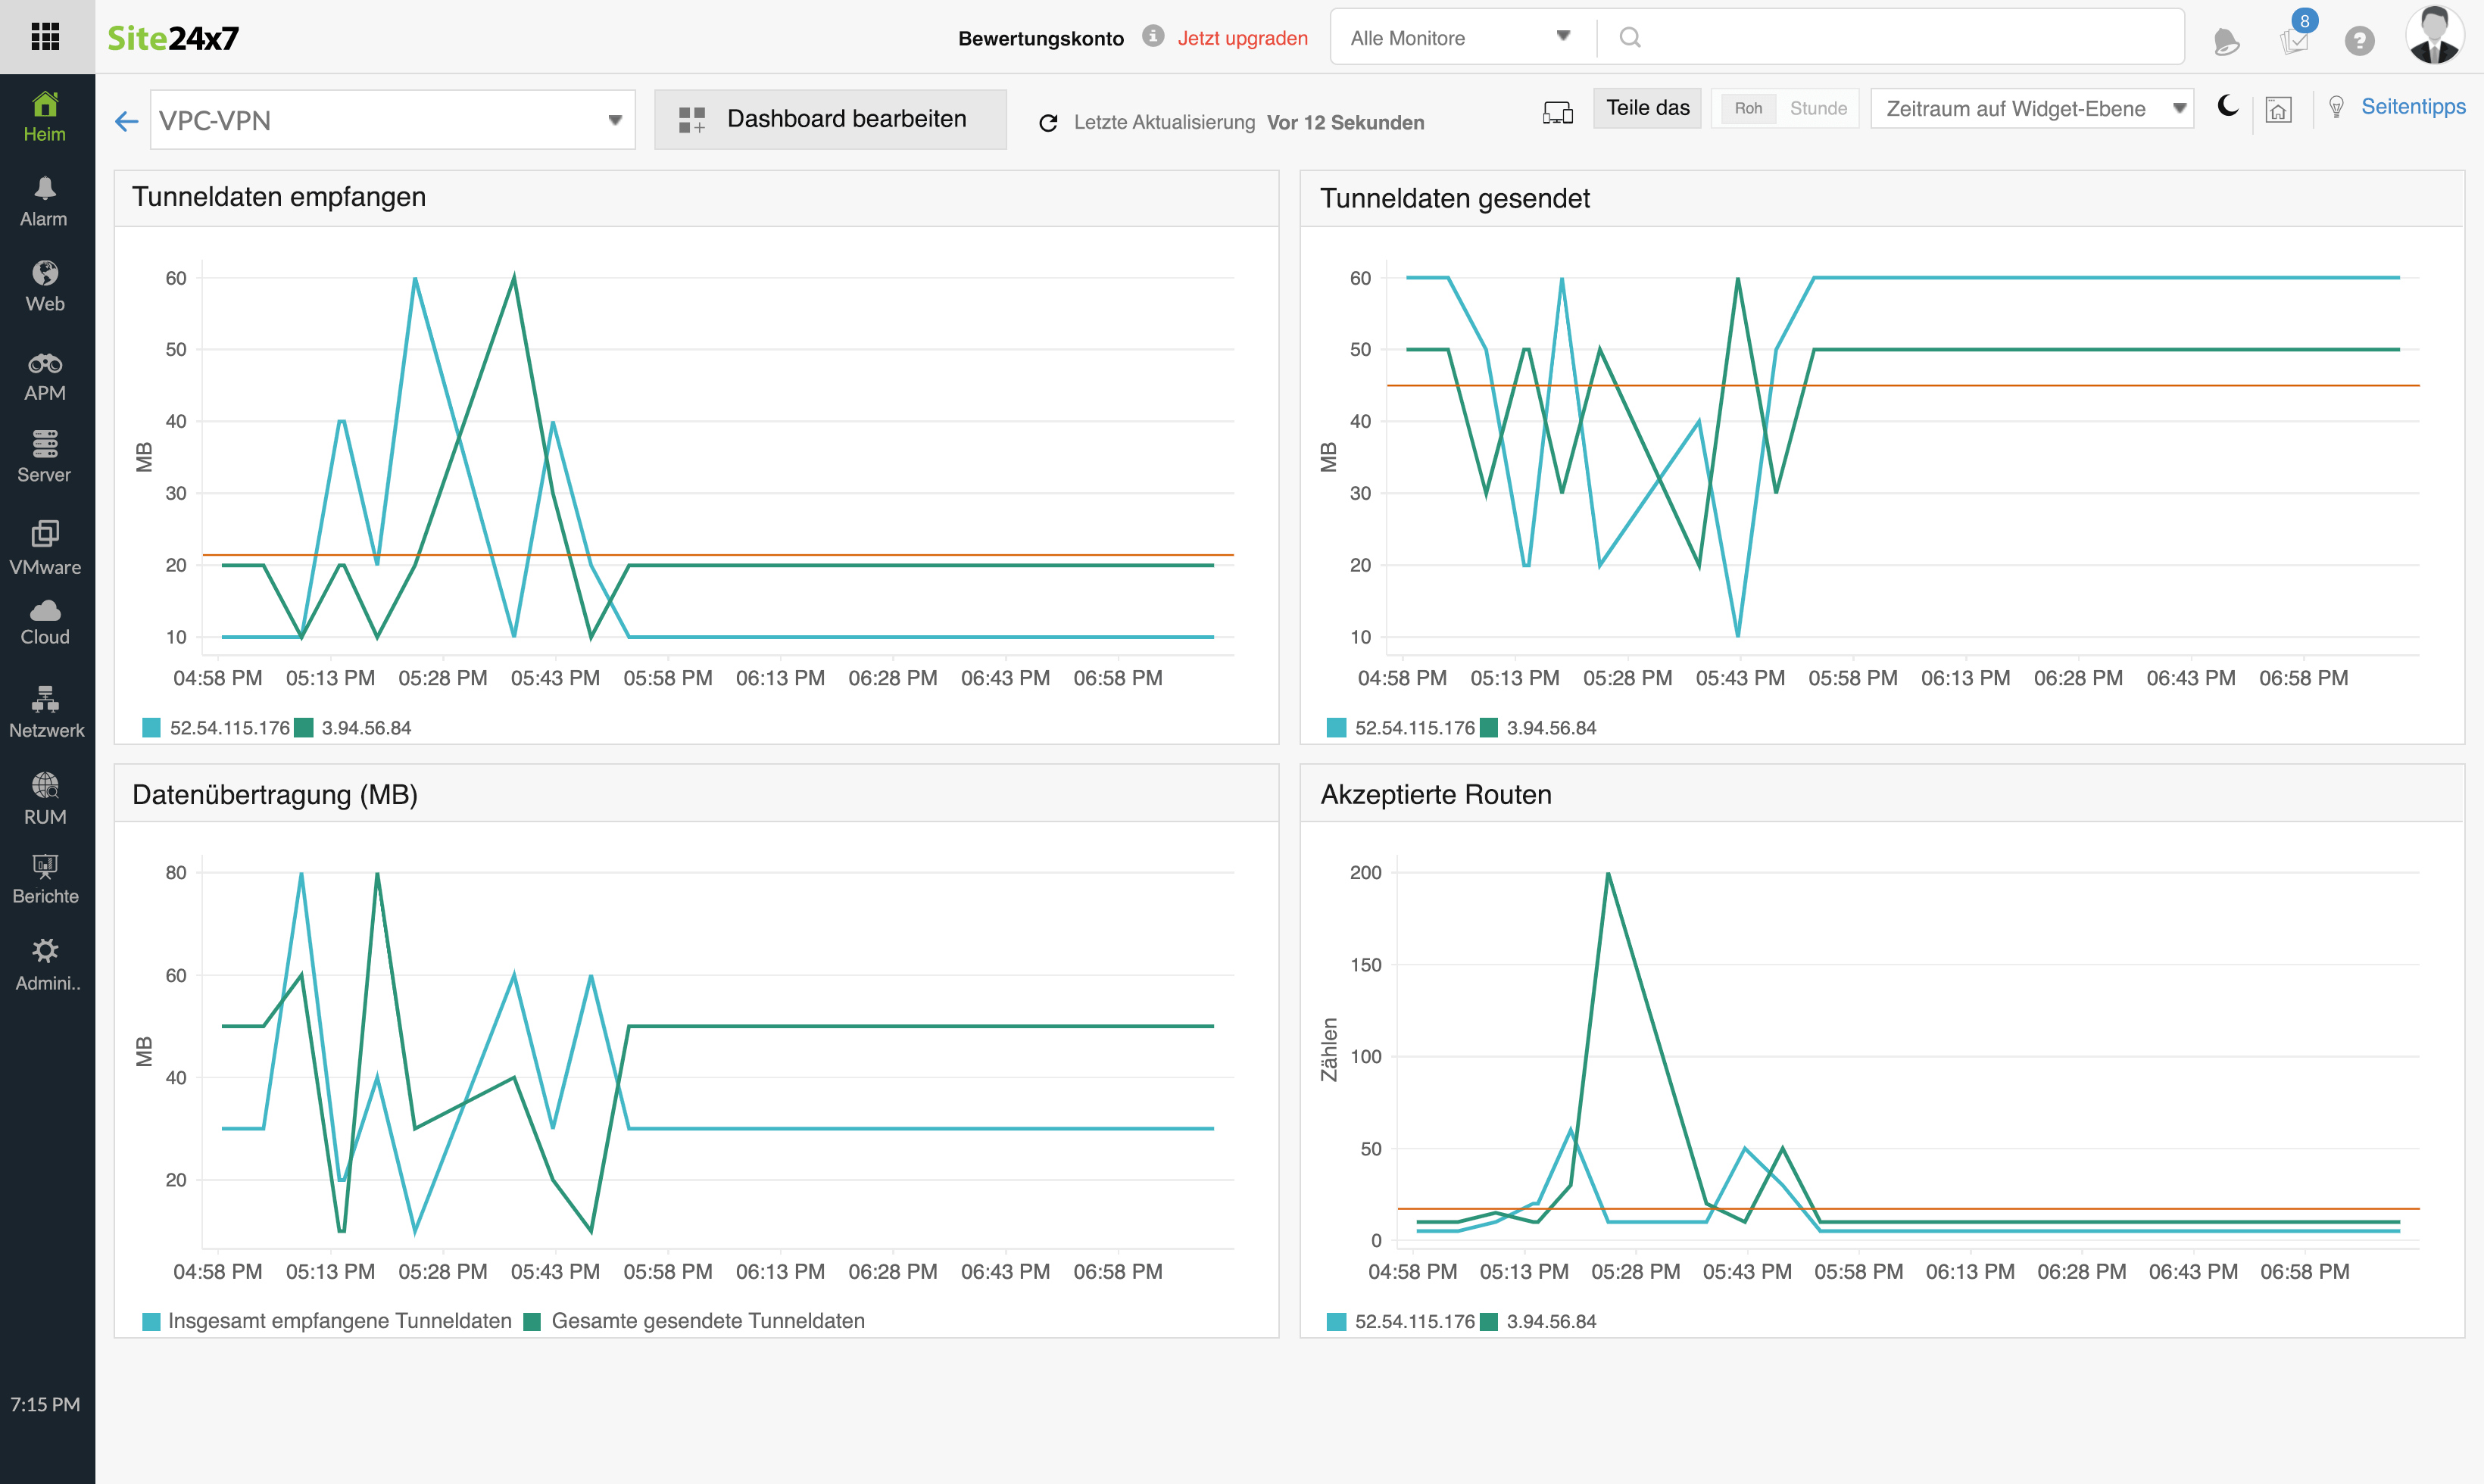 Amazon VPN monitoring from a single console.